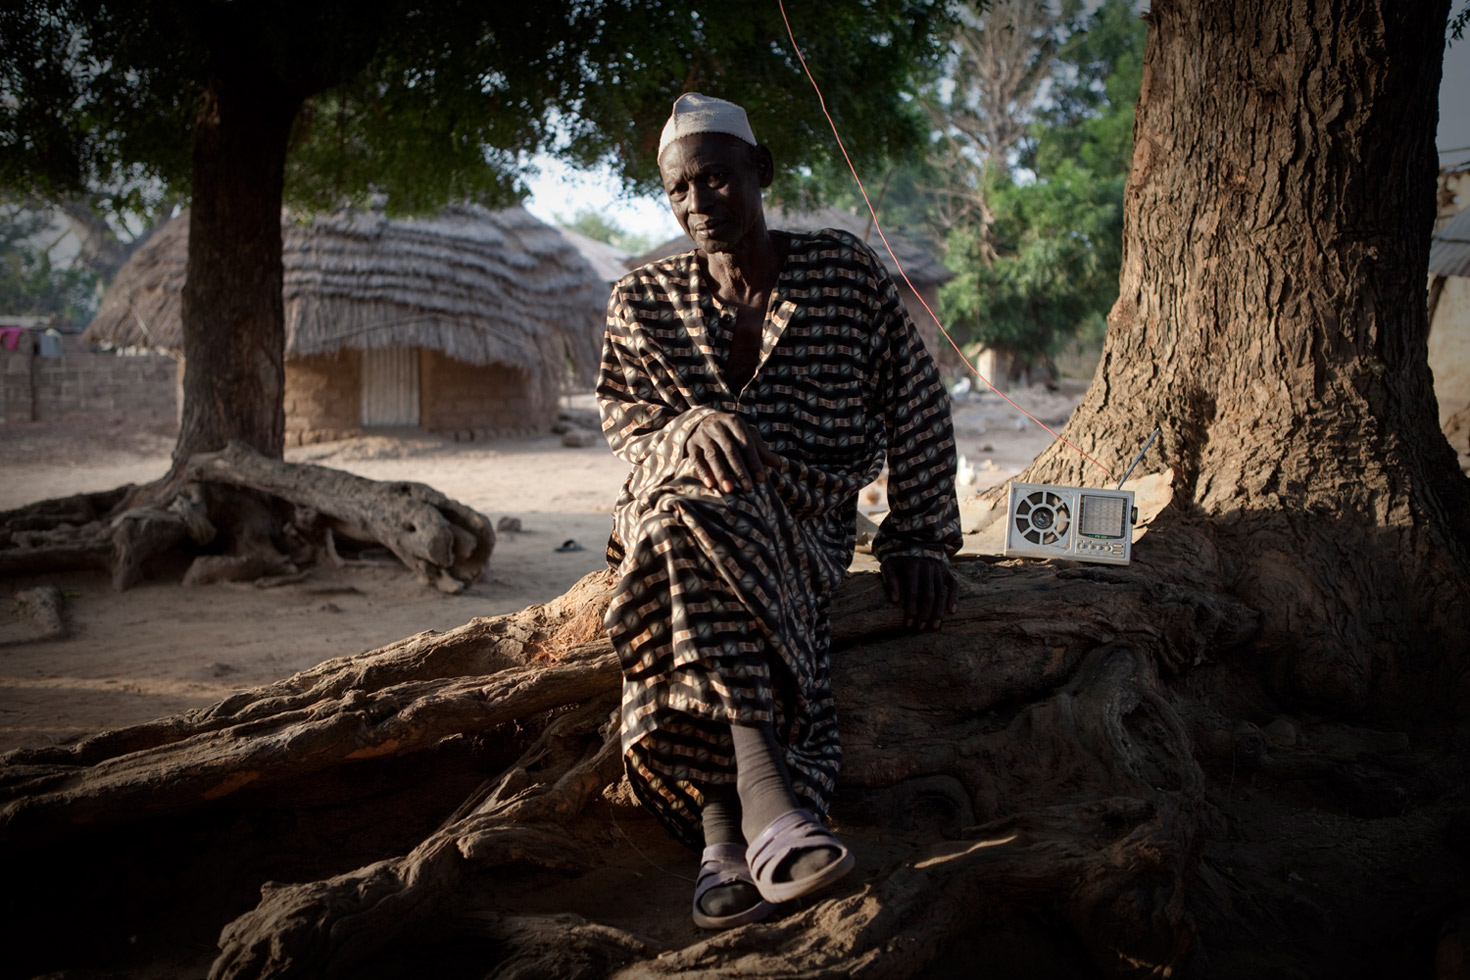 Bakary Dabo, the Alkalo (village chief) of Diagabu Tenda, a small settlement on the banks of the River Gambia. The position is unpaid, and the Alkalo is responsible for negotiating disputes, giving land rights and also to be the host and protector of visitors to his village.